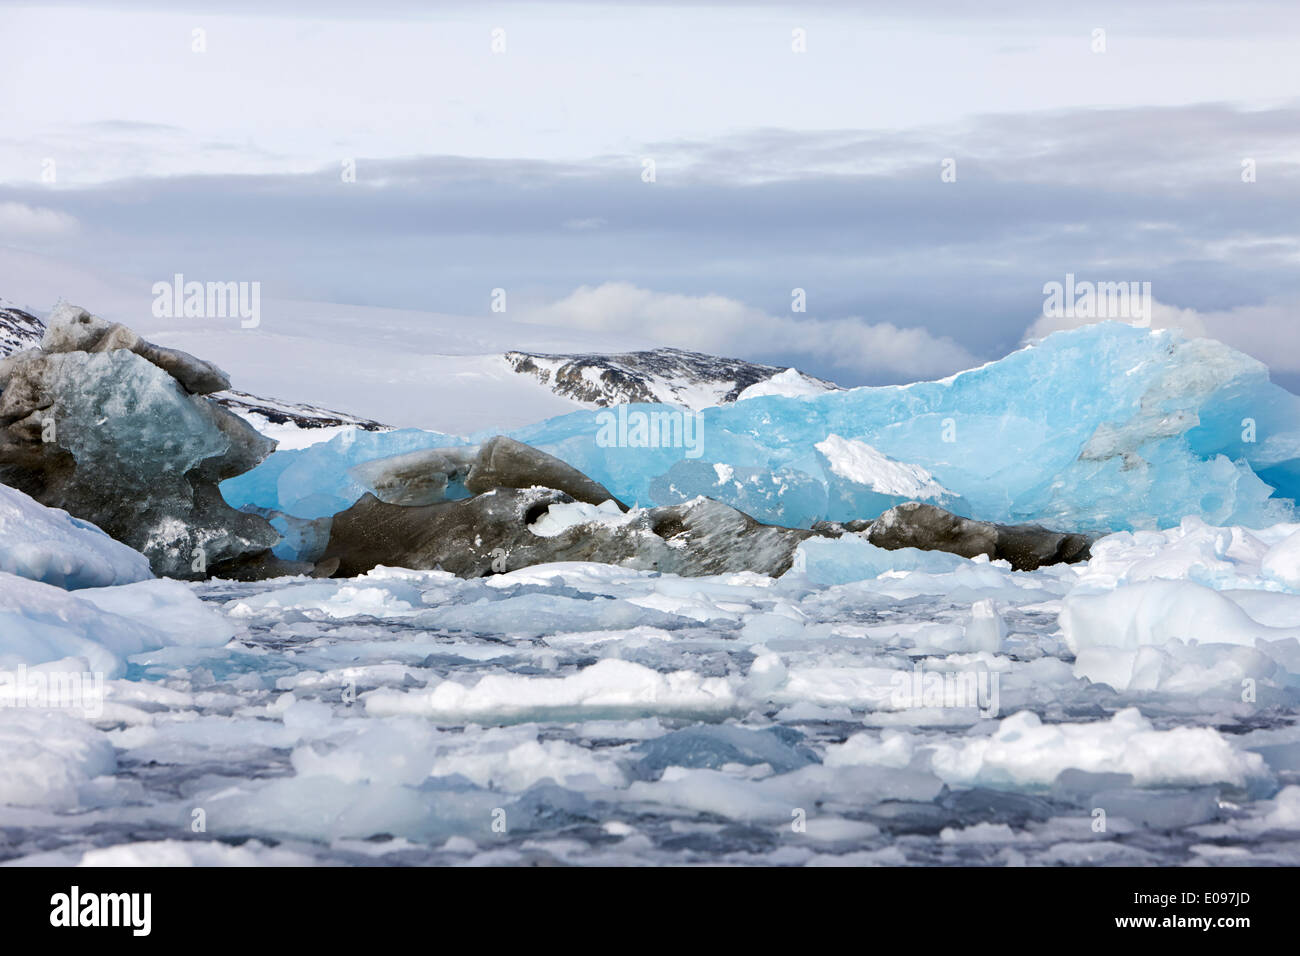 brash sea pack ice forming together with dirty blue iceberg as winter approaches cierva cove Antarctica Stock Photo